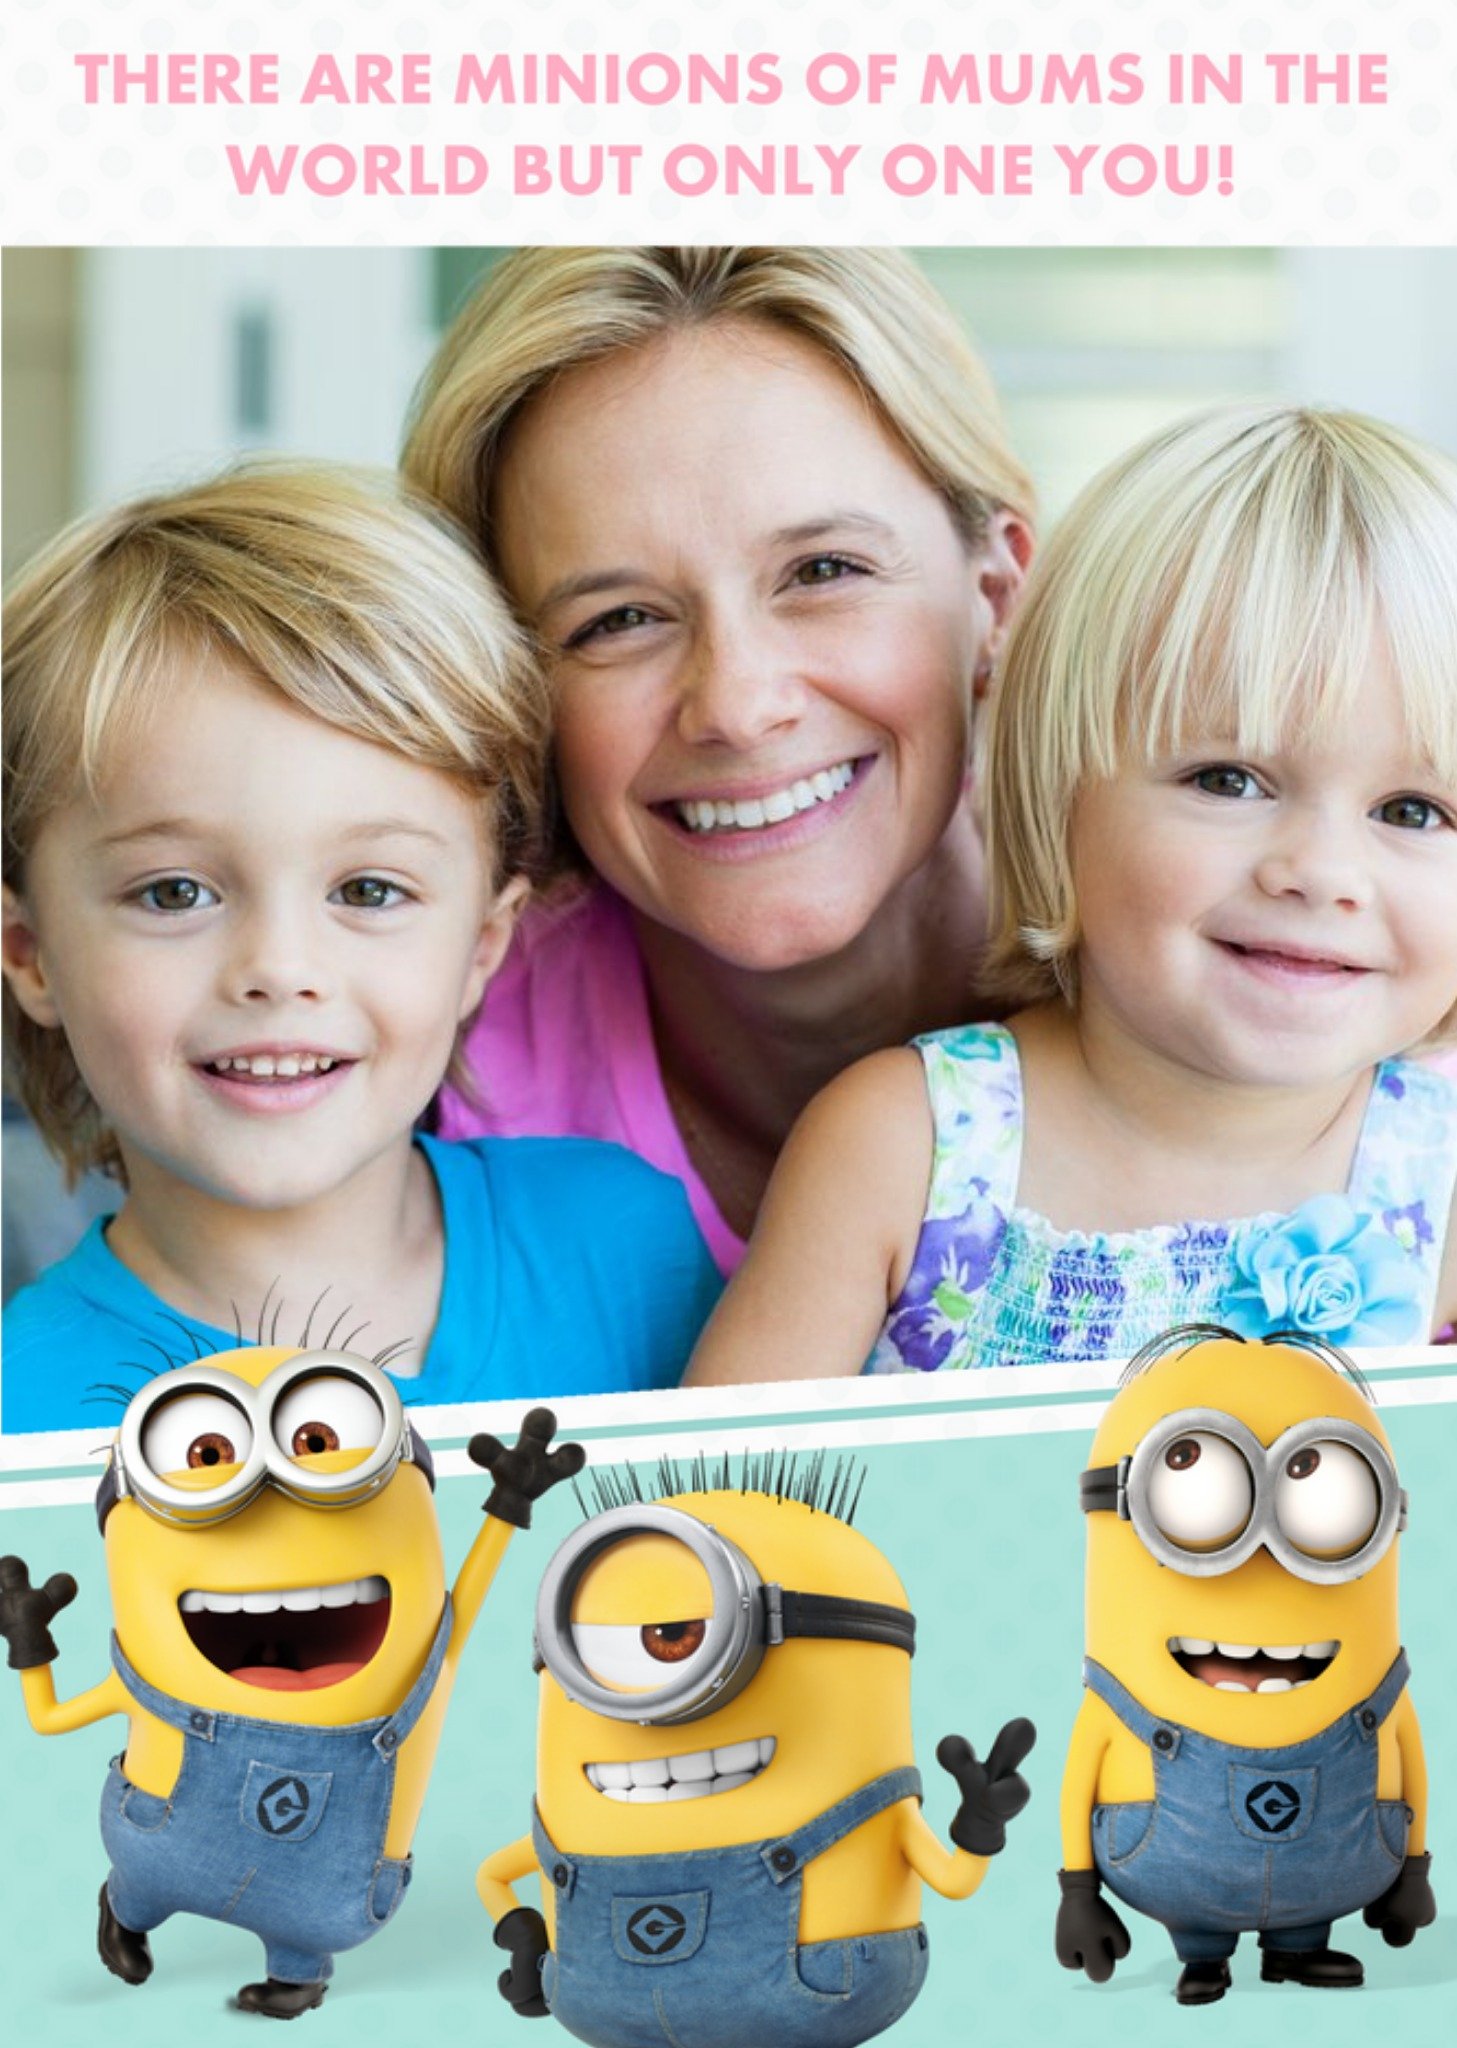 Mother's Day Card - Minions - Despicable Me - Photo Upload Card, Large